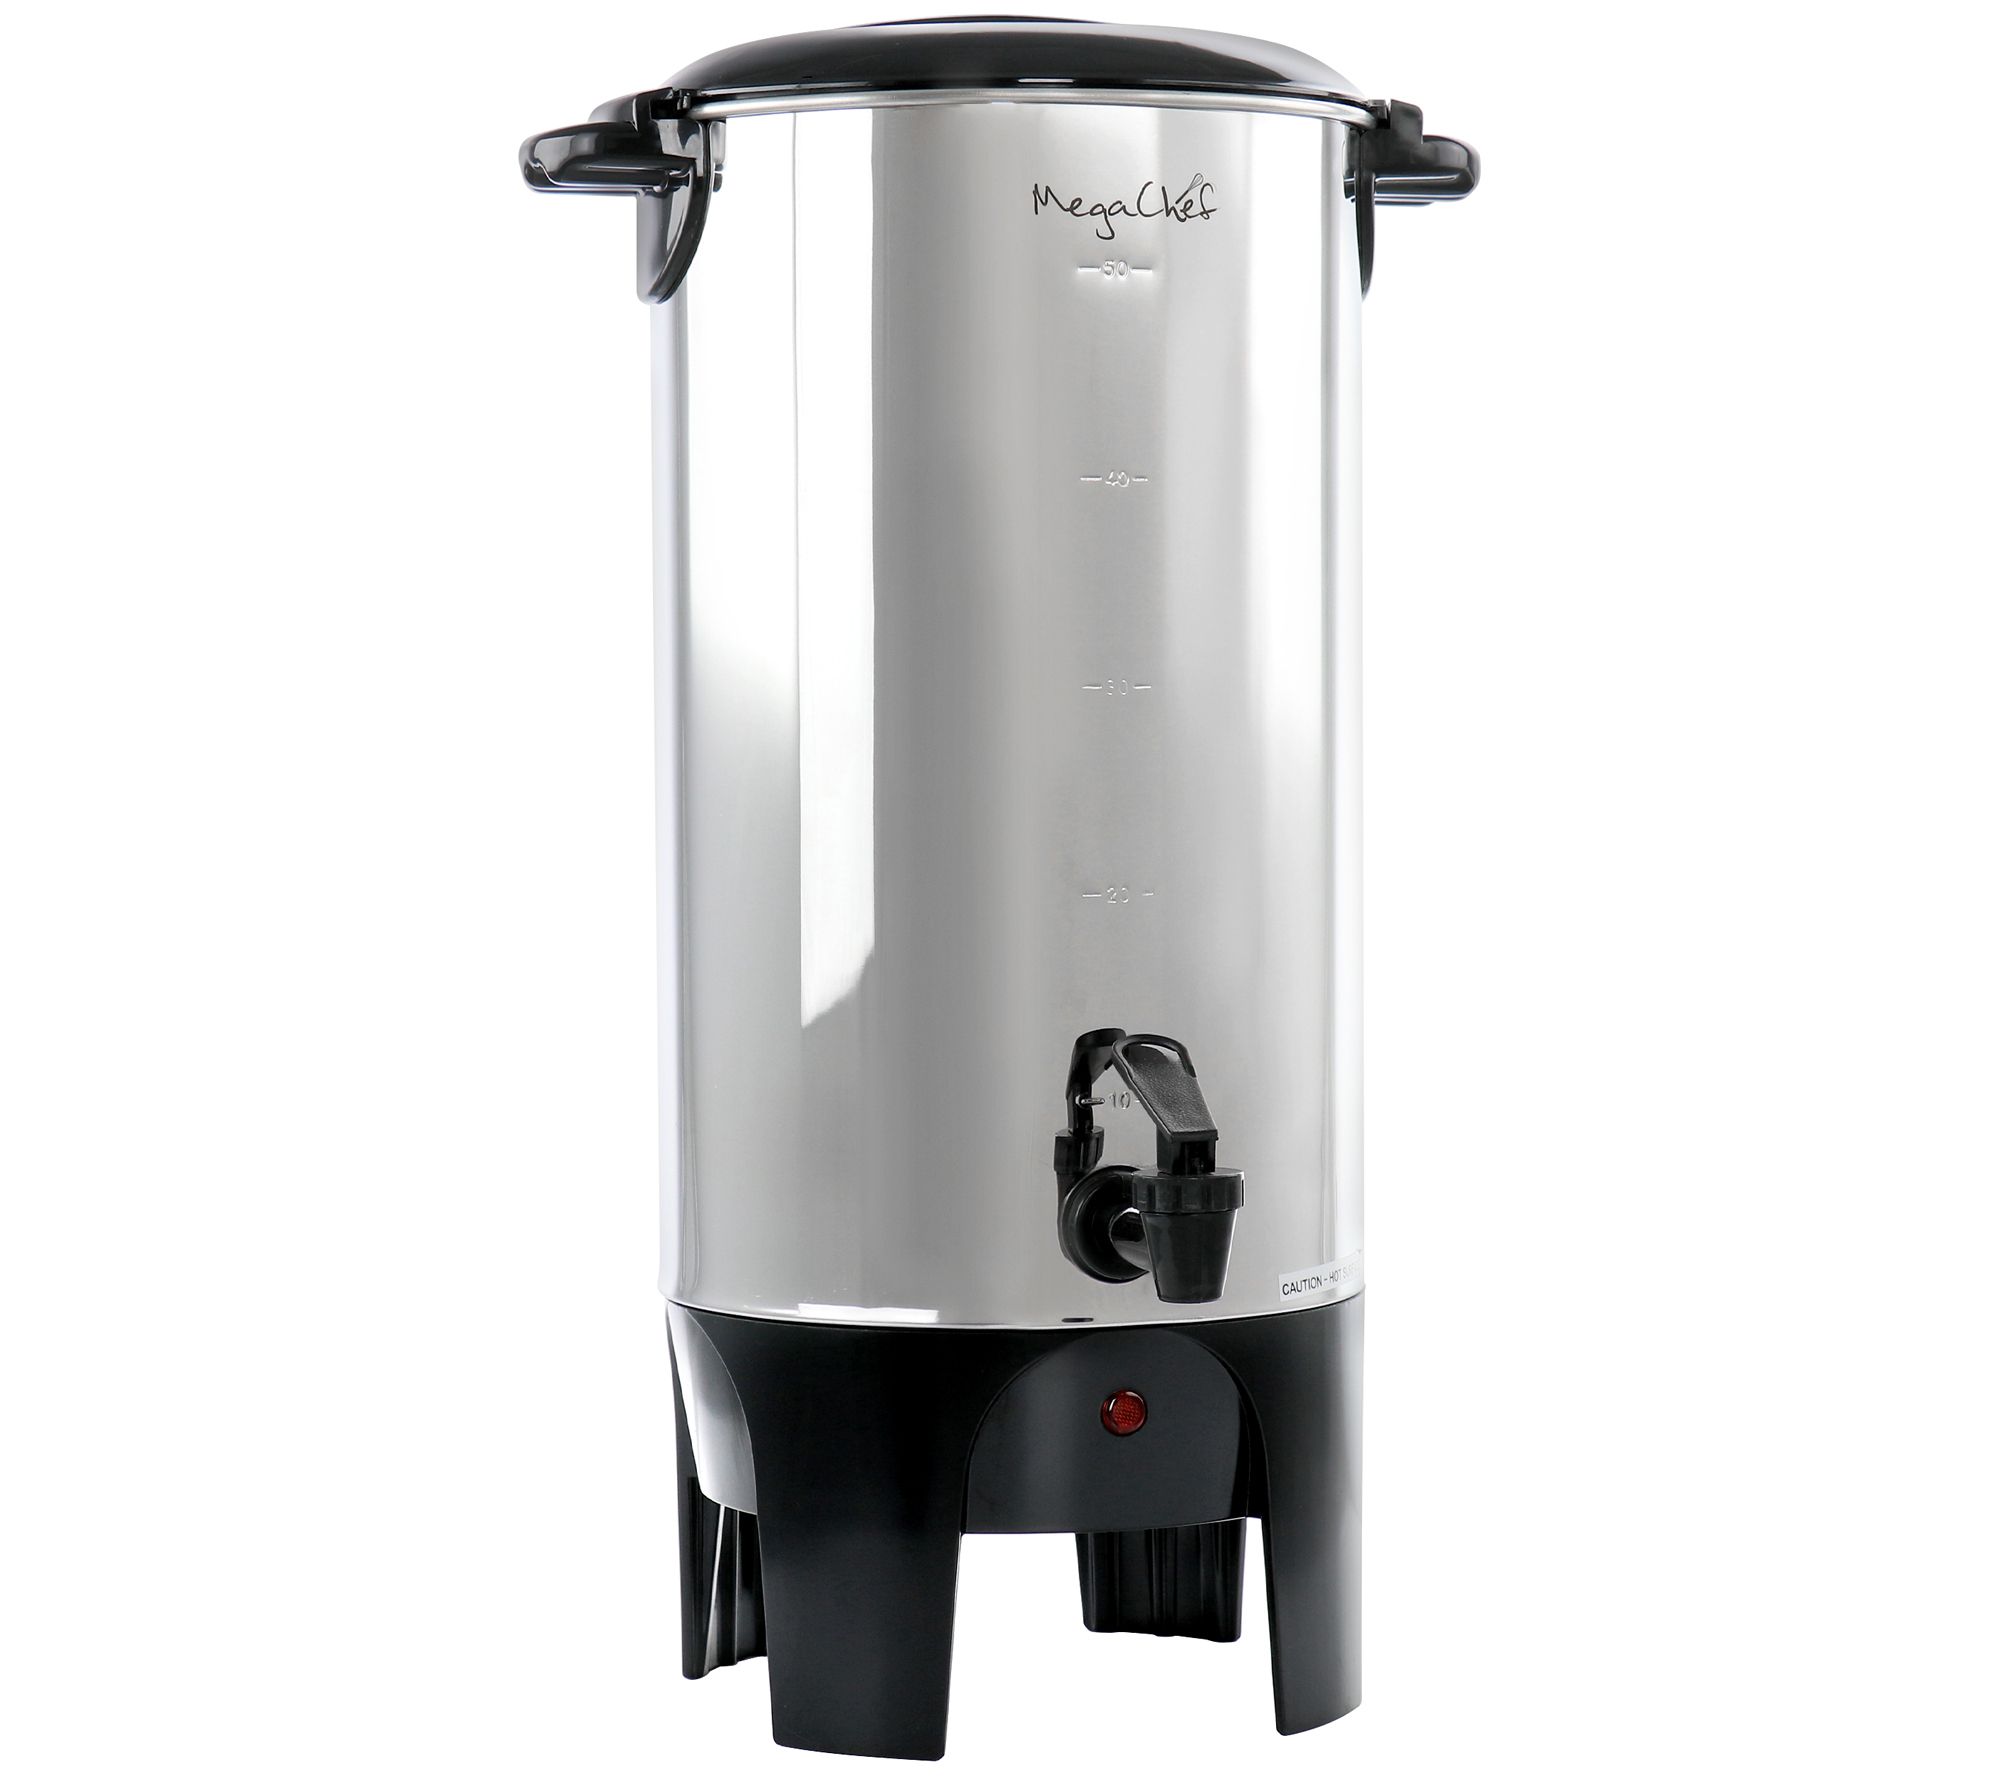 West Bend 33600 100-Cup Coffee Maker Commercial Urn Percolator Aluminum B